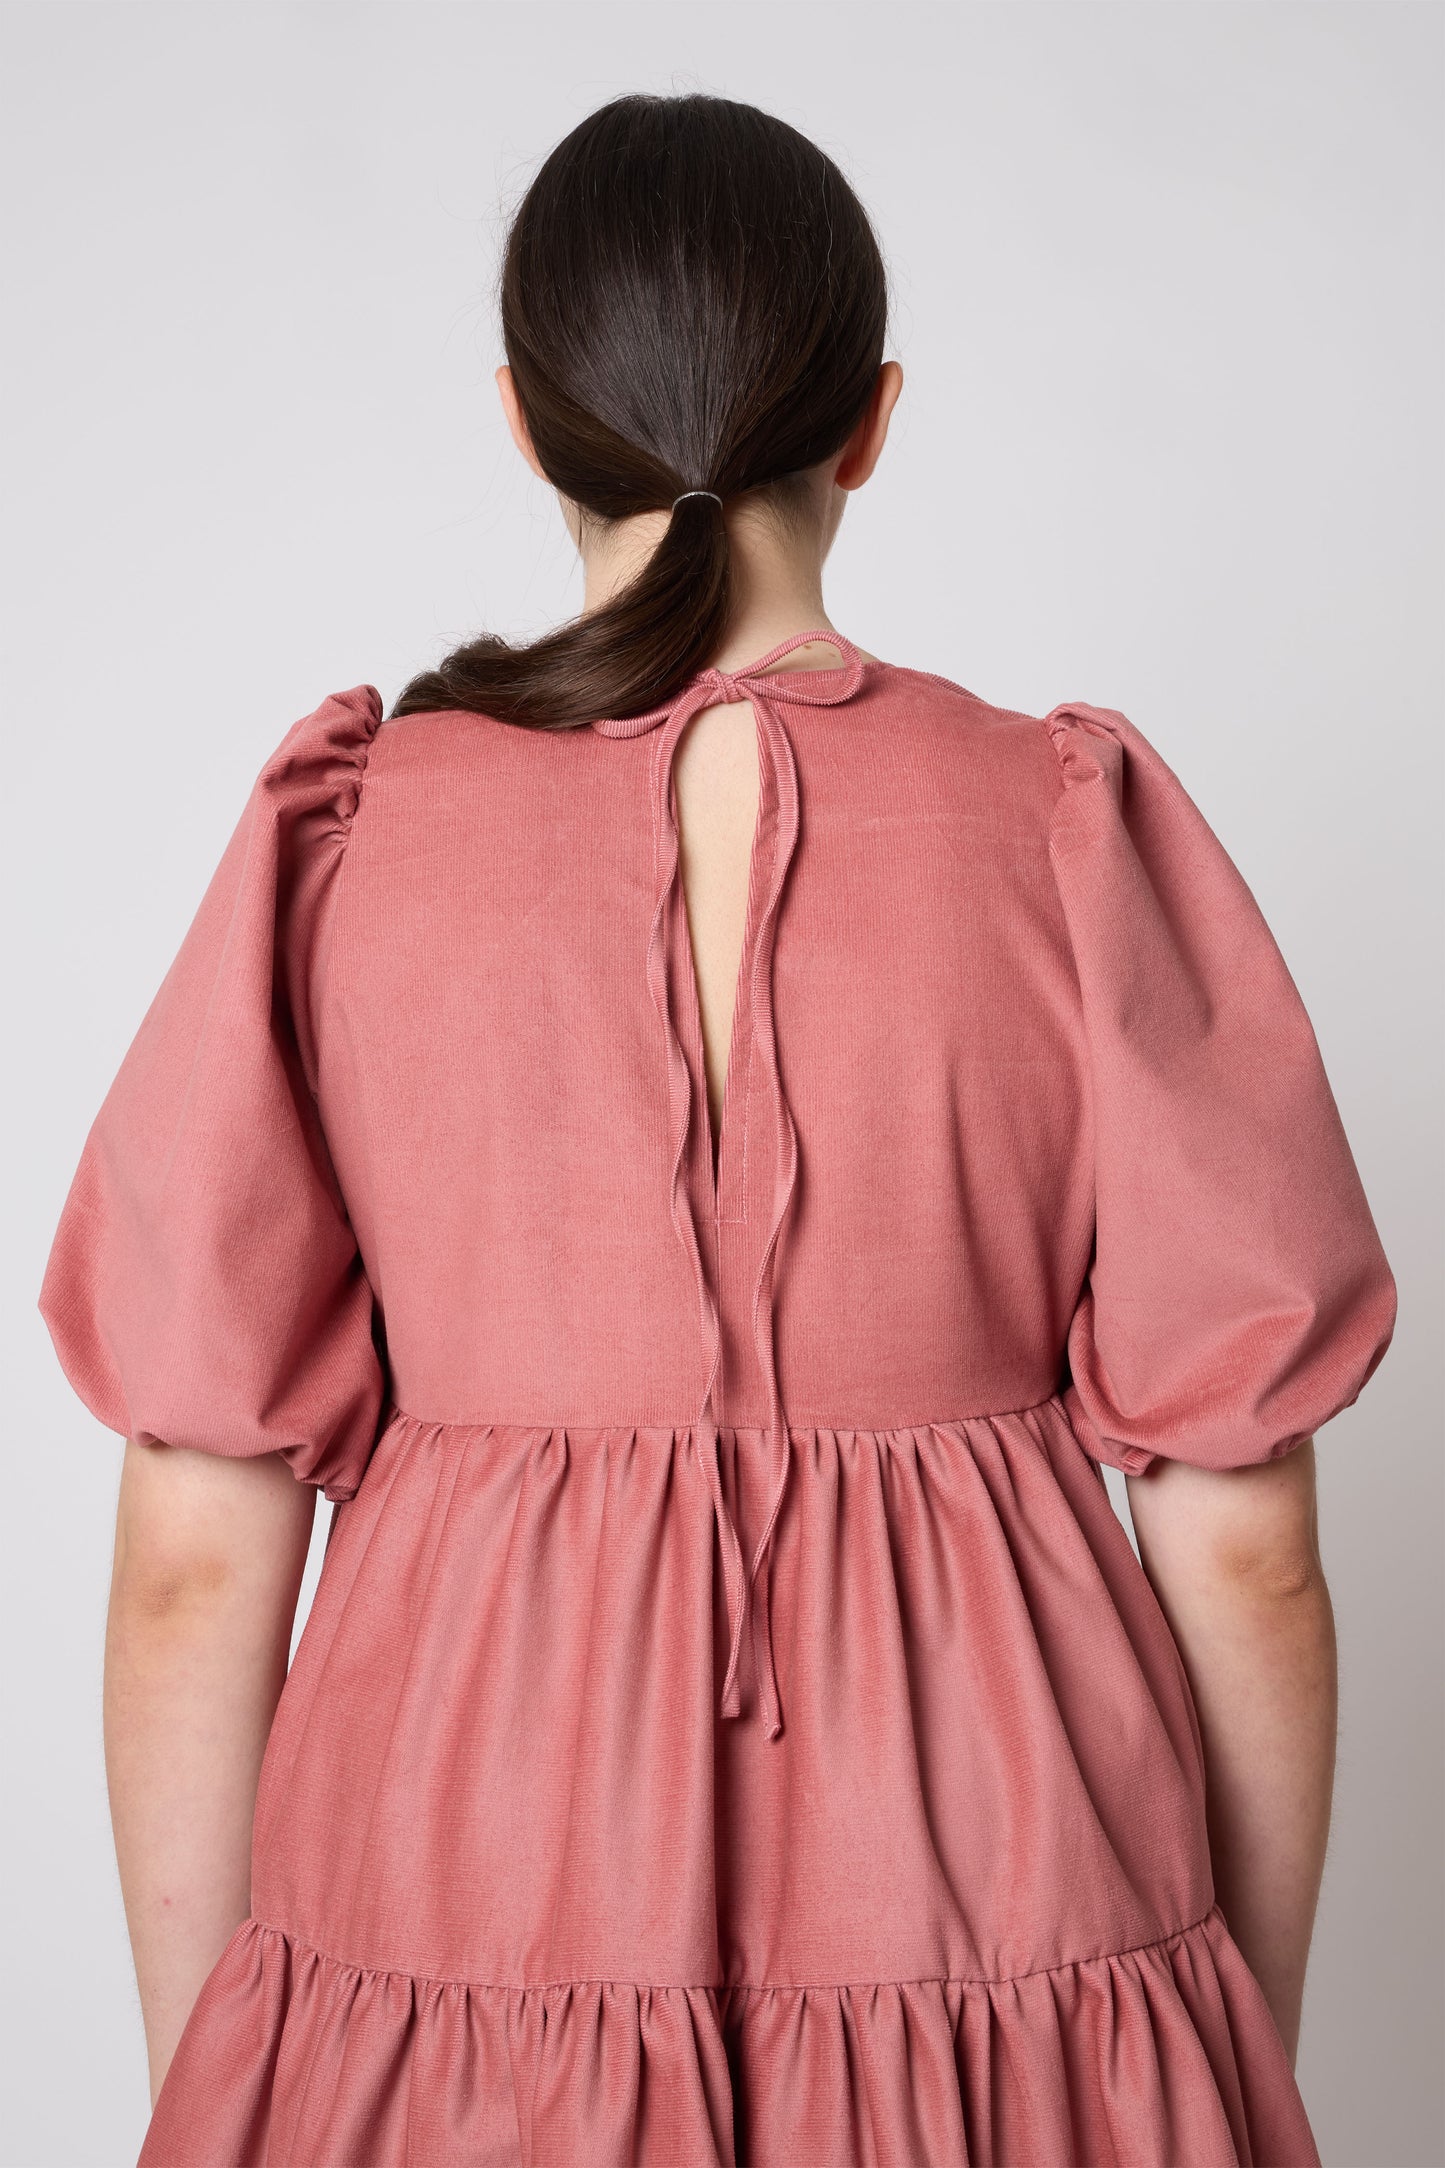 Isabelle Dress in Rosa Antico